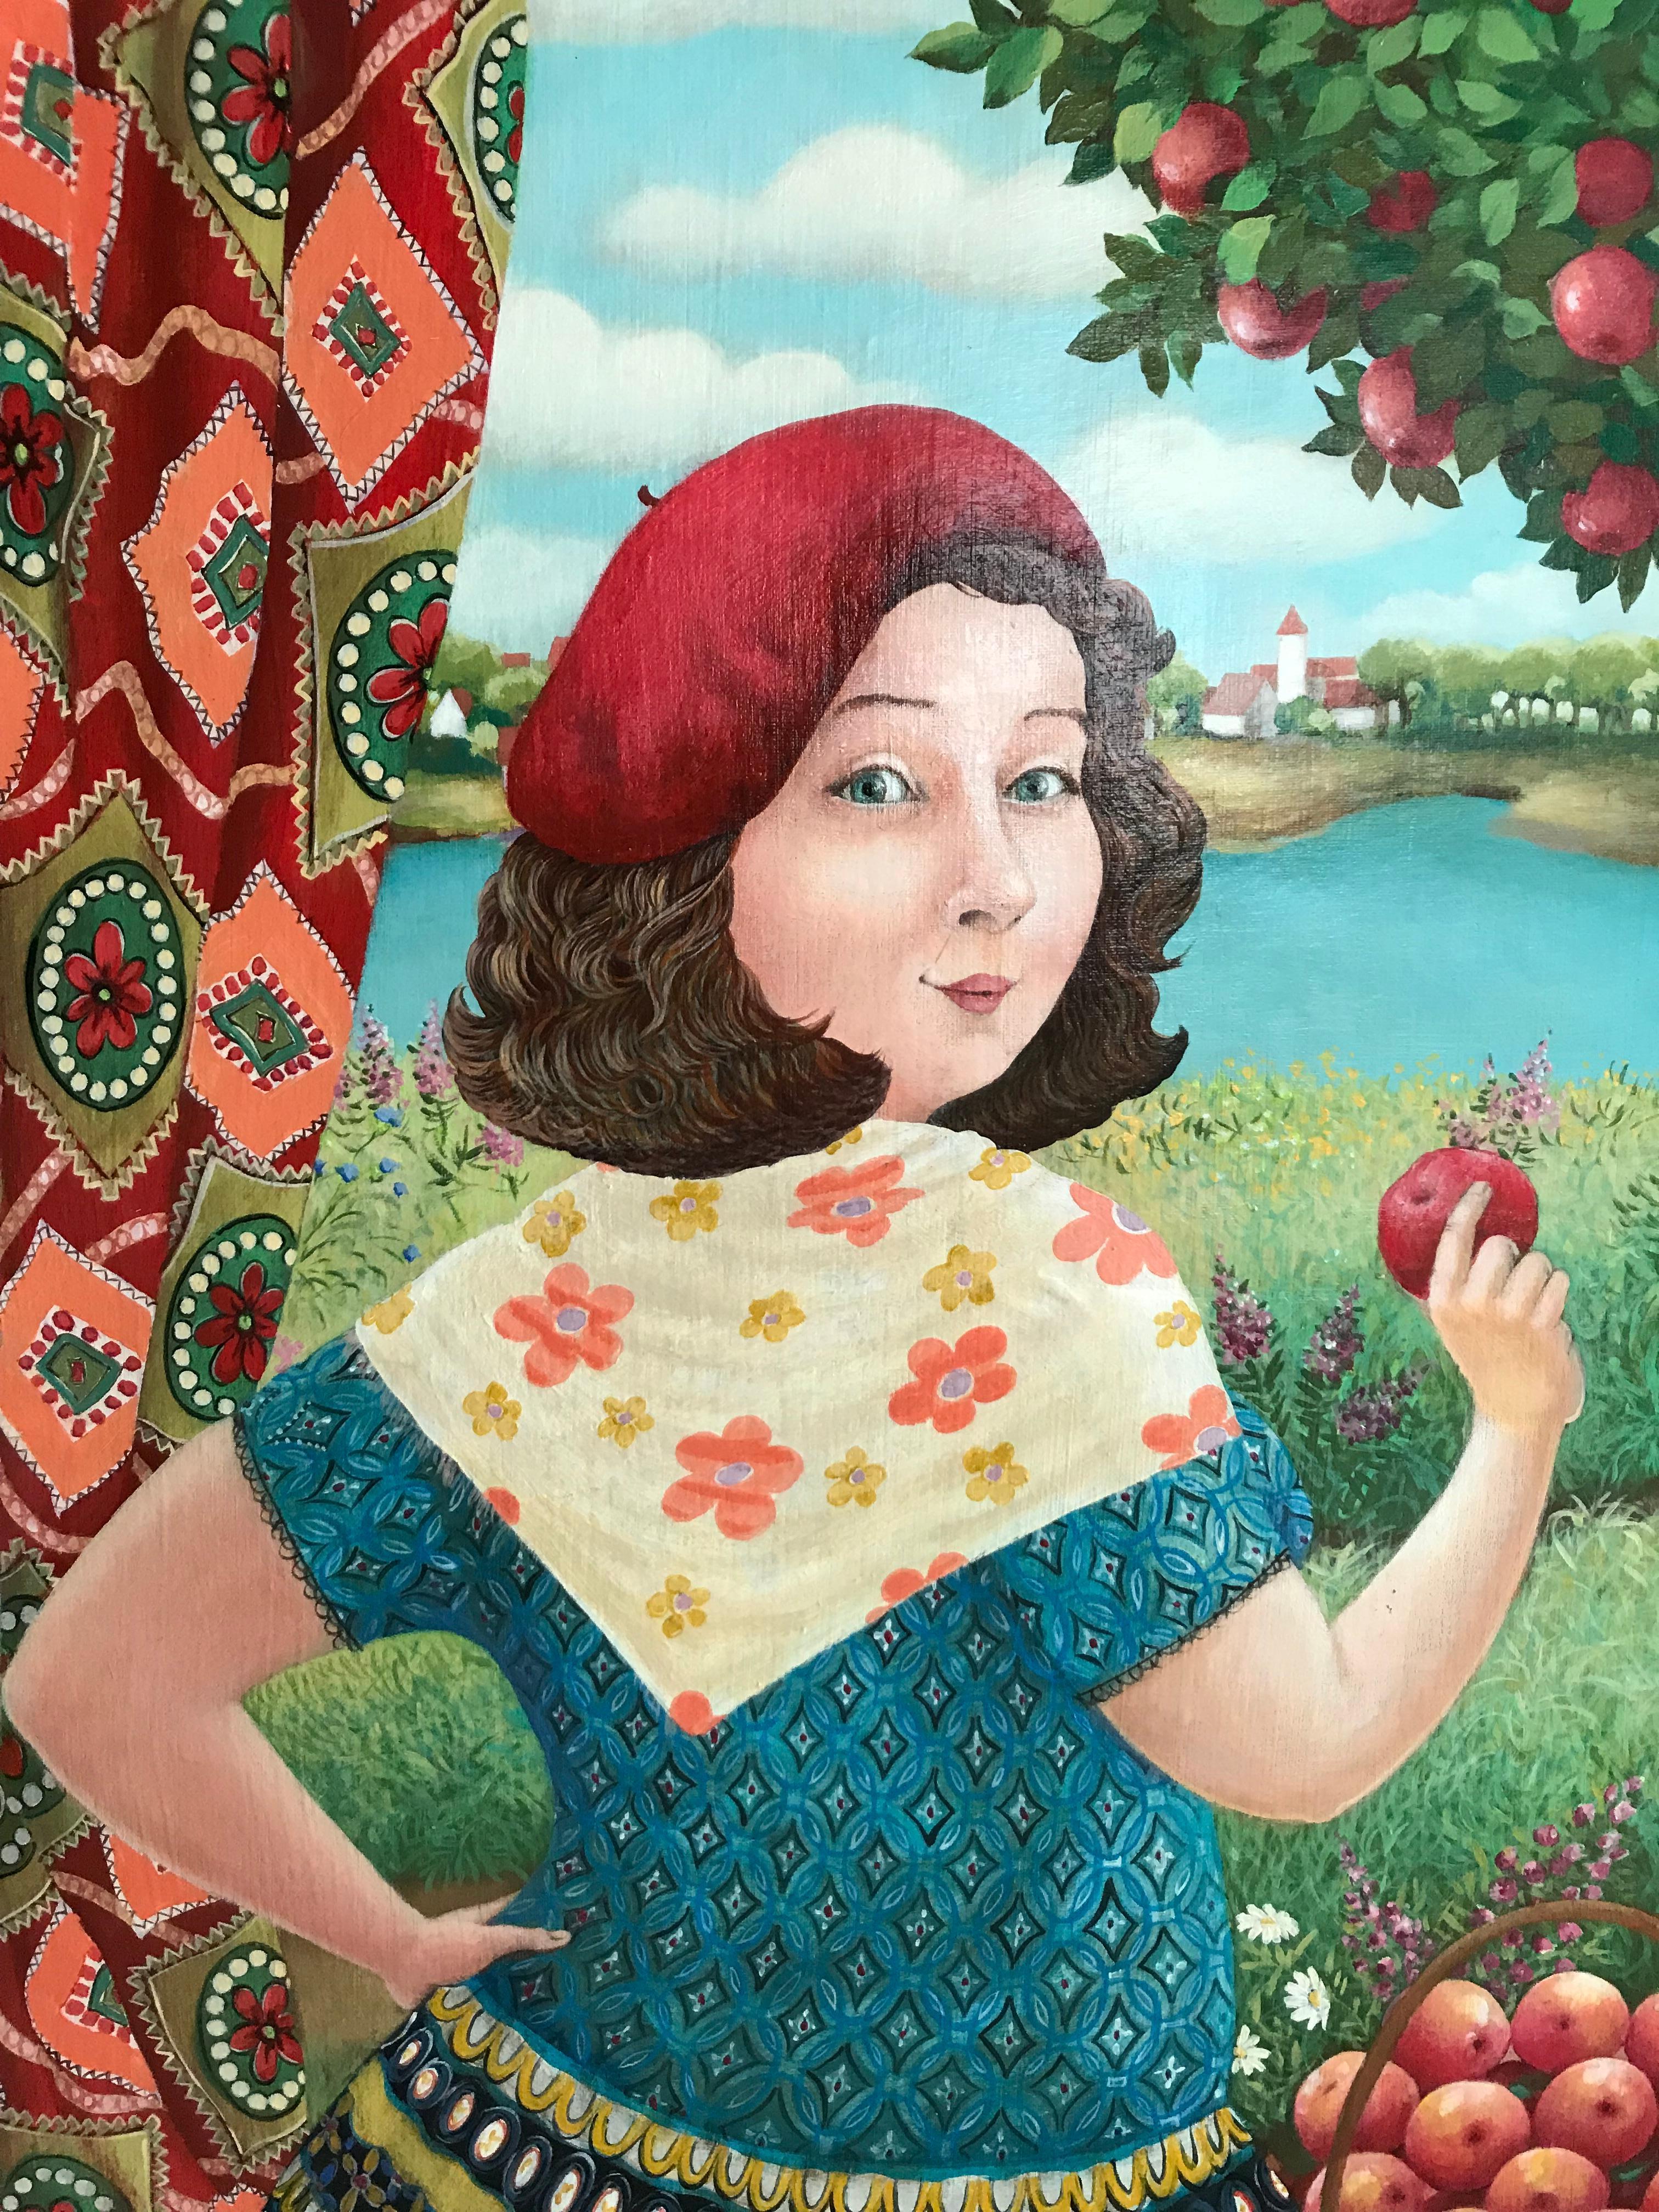 The Girl in Red Beret with apples - naive art, made in red, green, blue colors - Painting by Elena Narkevich